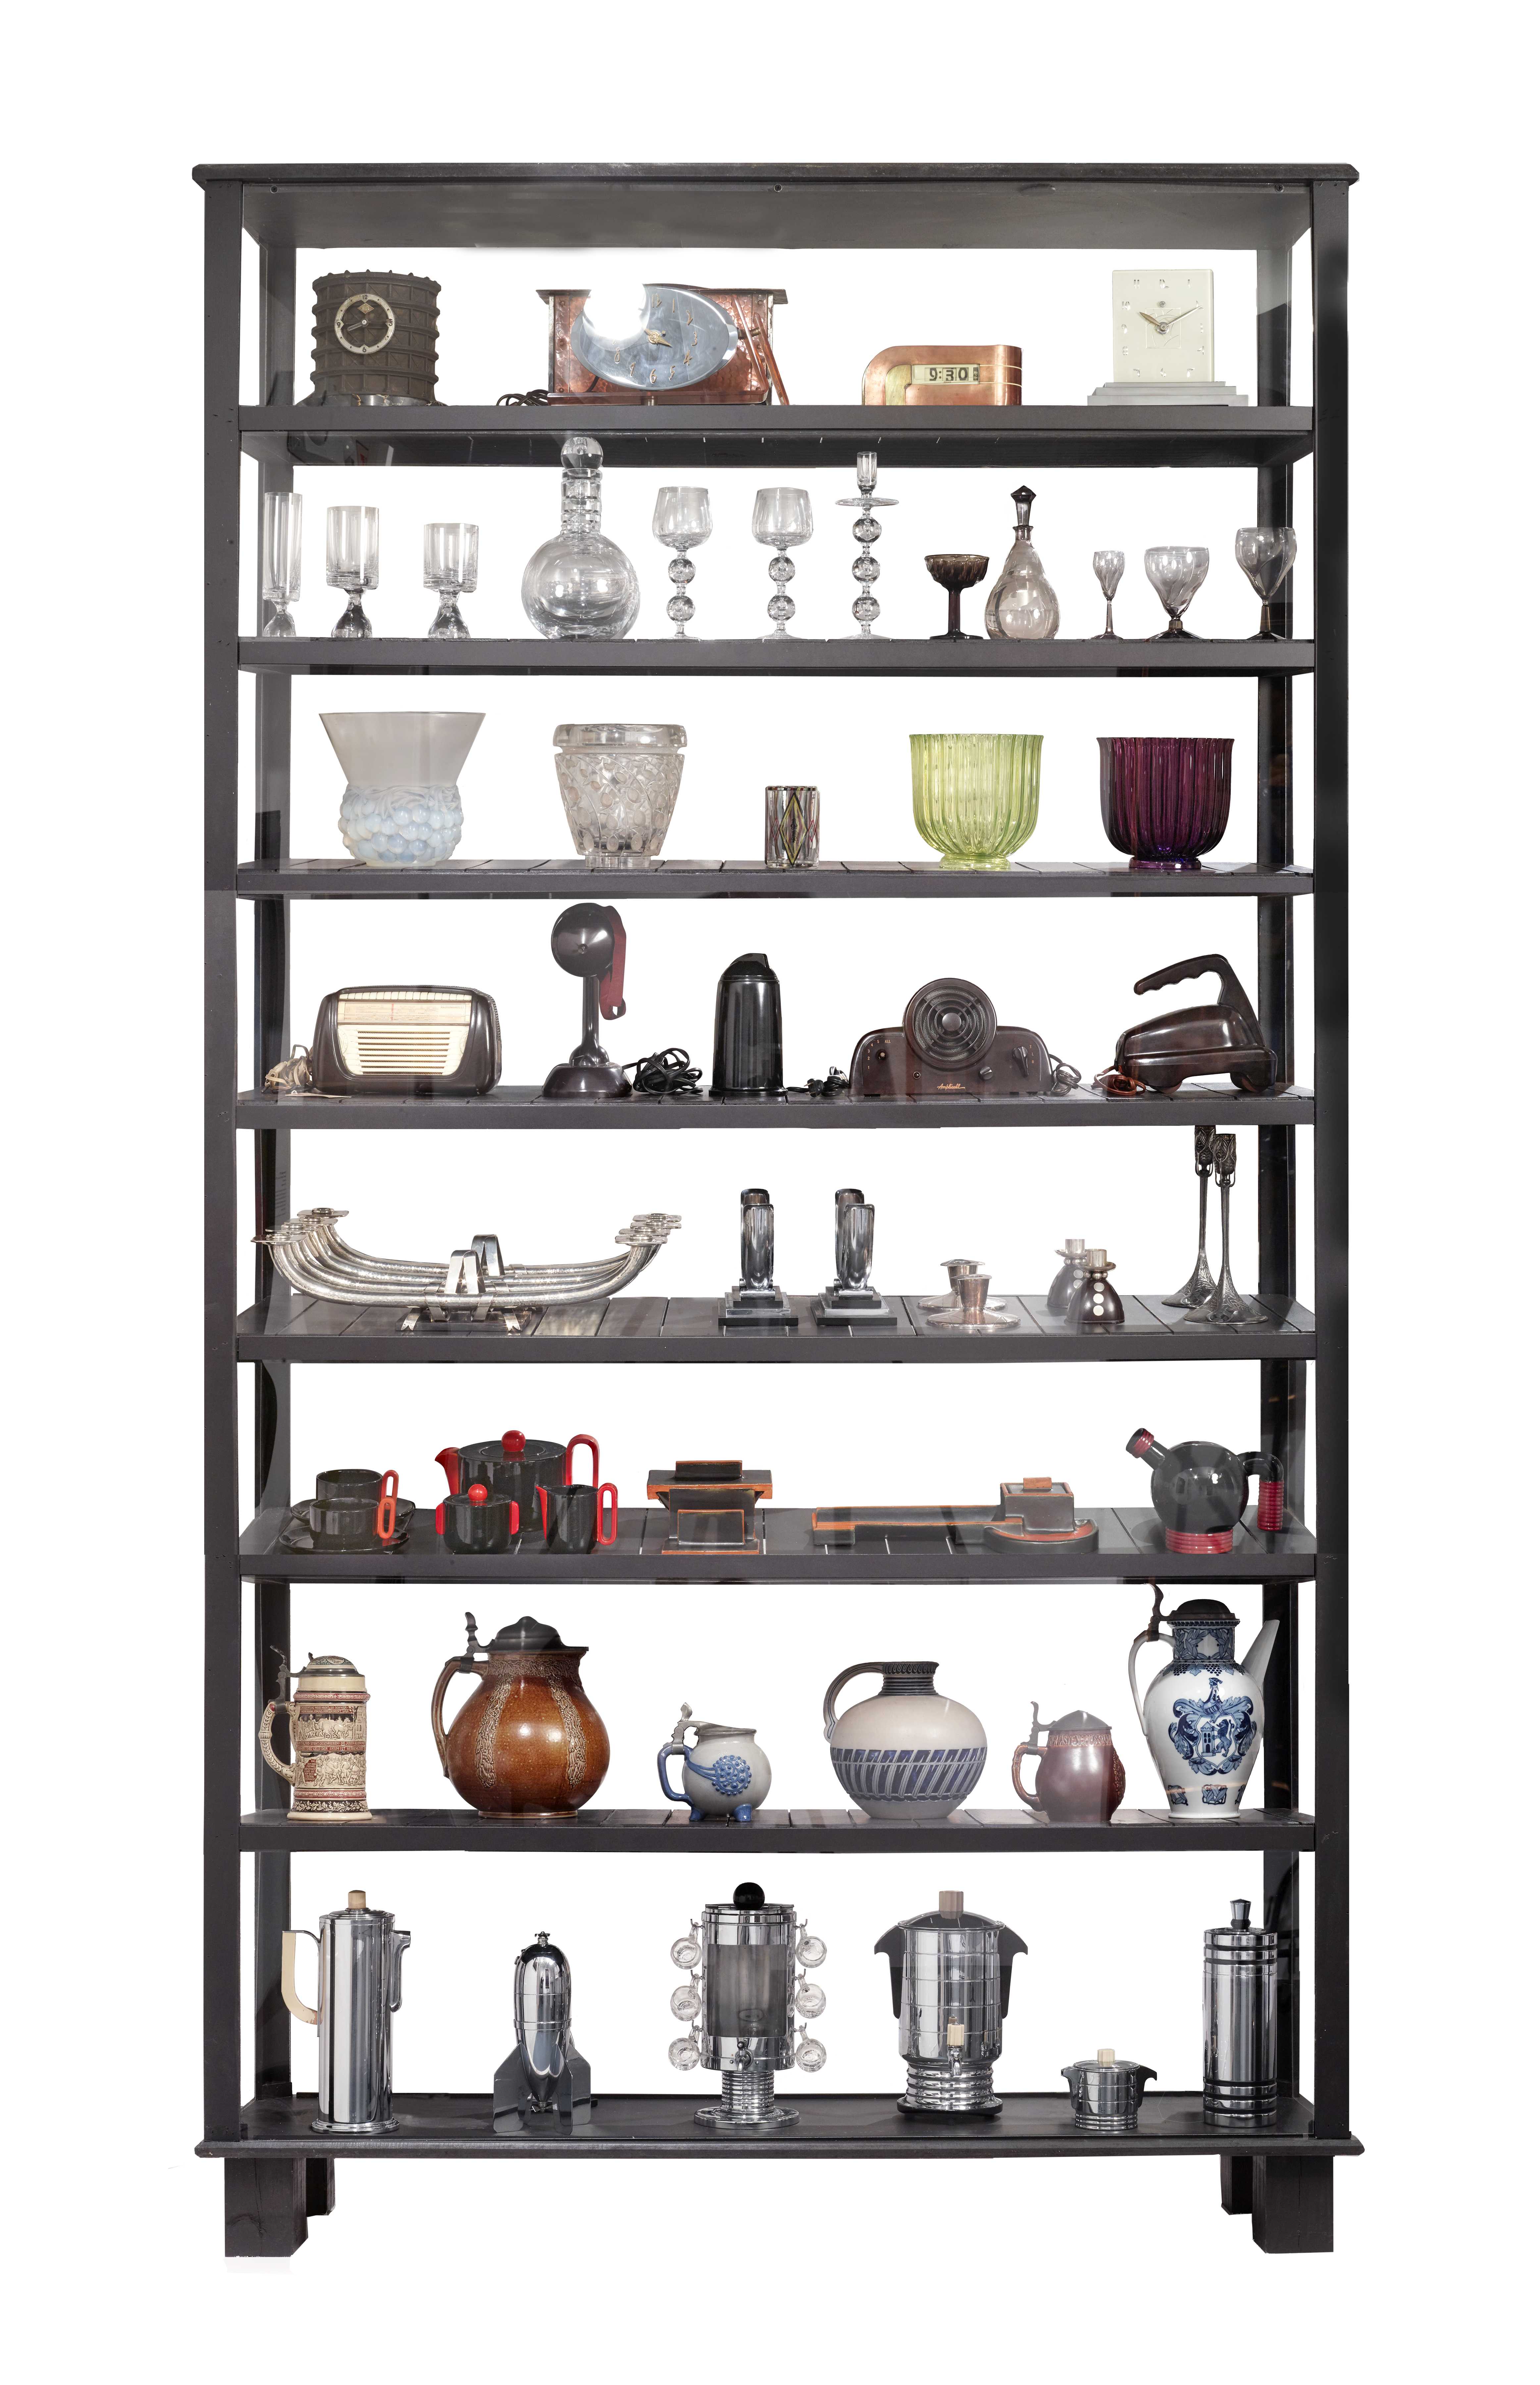 Test image of shelving for image map